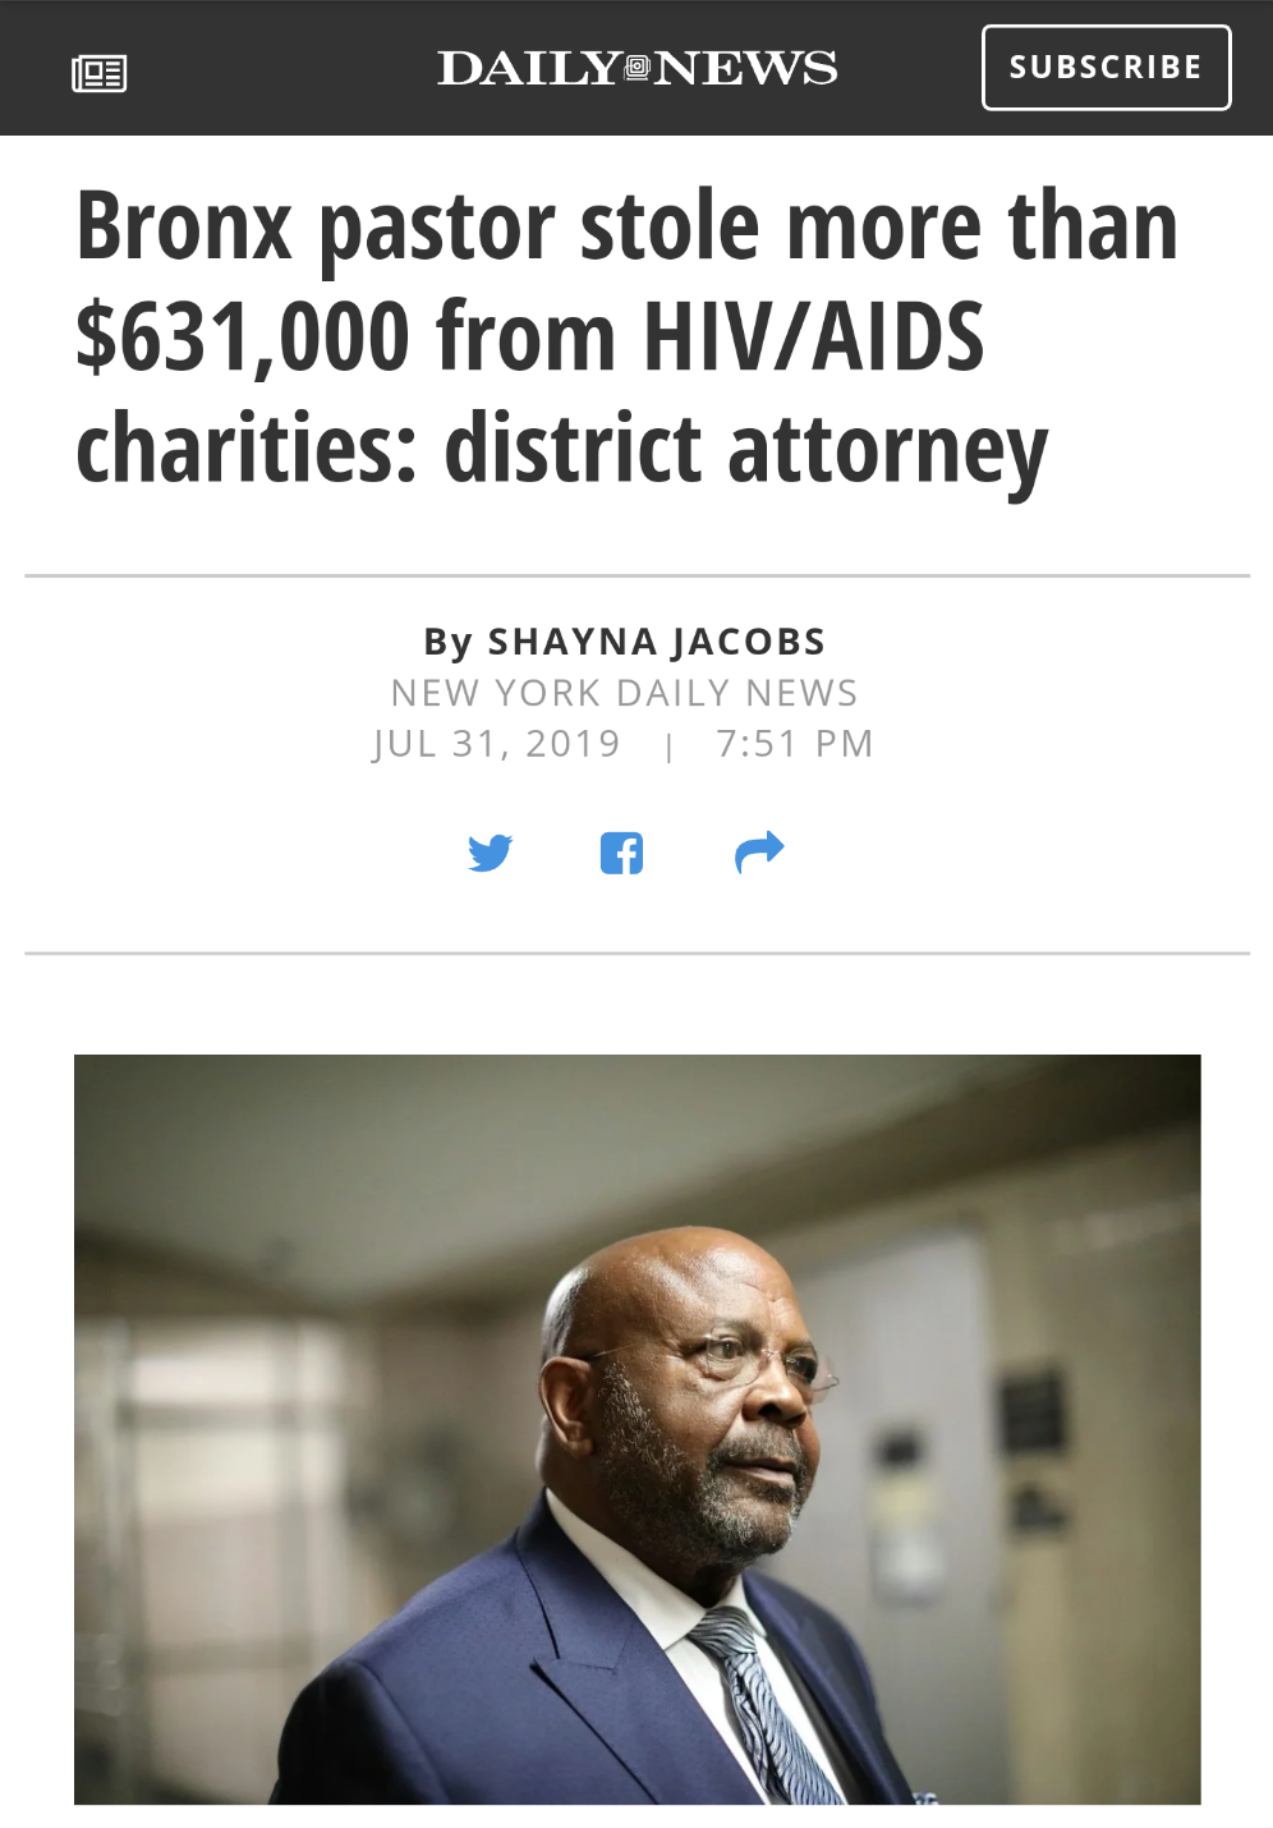 human behavior - Daily News Subscribe Bronx pastor stole more than $631,000 from HivAids charities district attorney By Shayna Jacobs New York Daily News